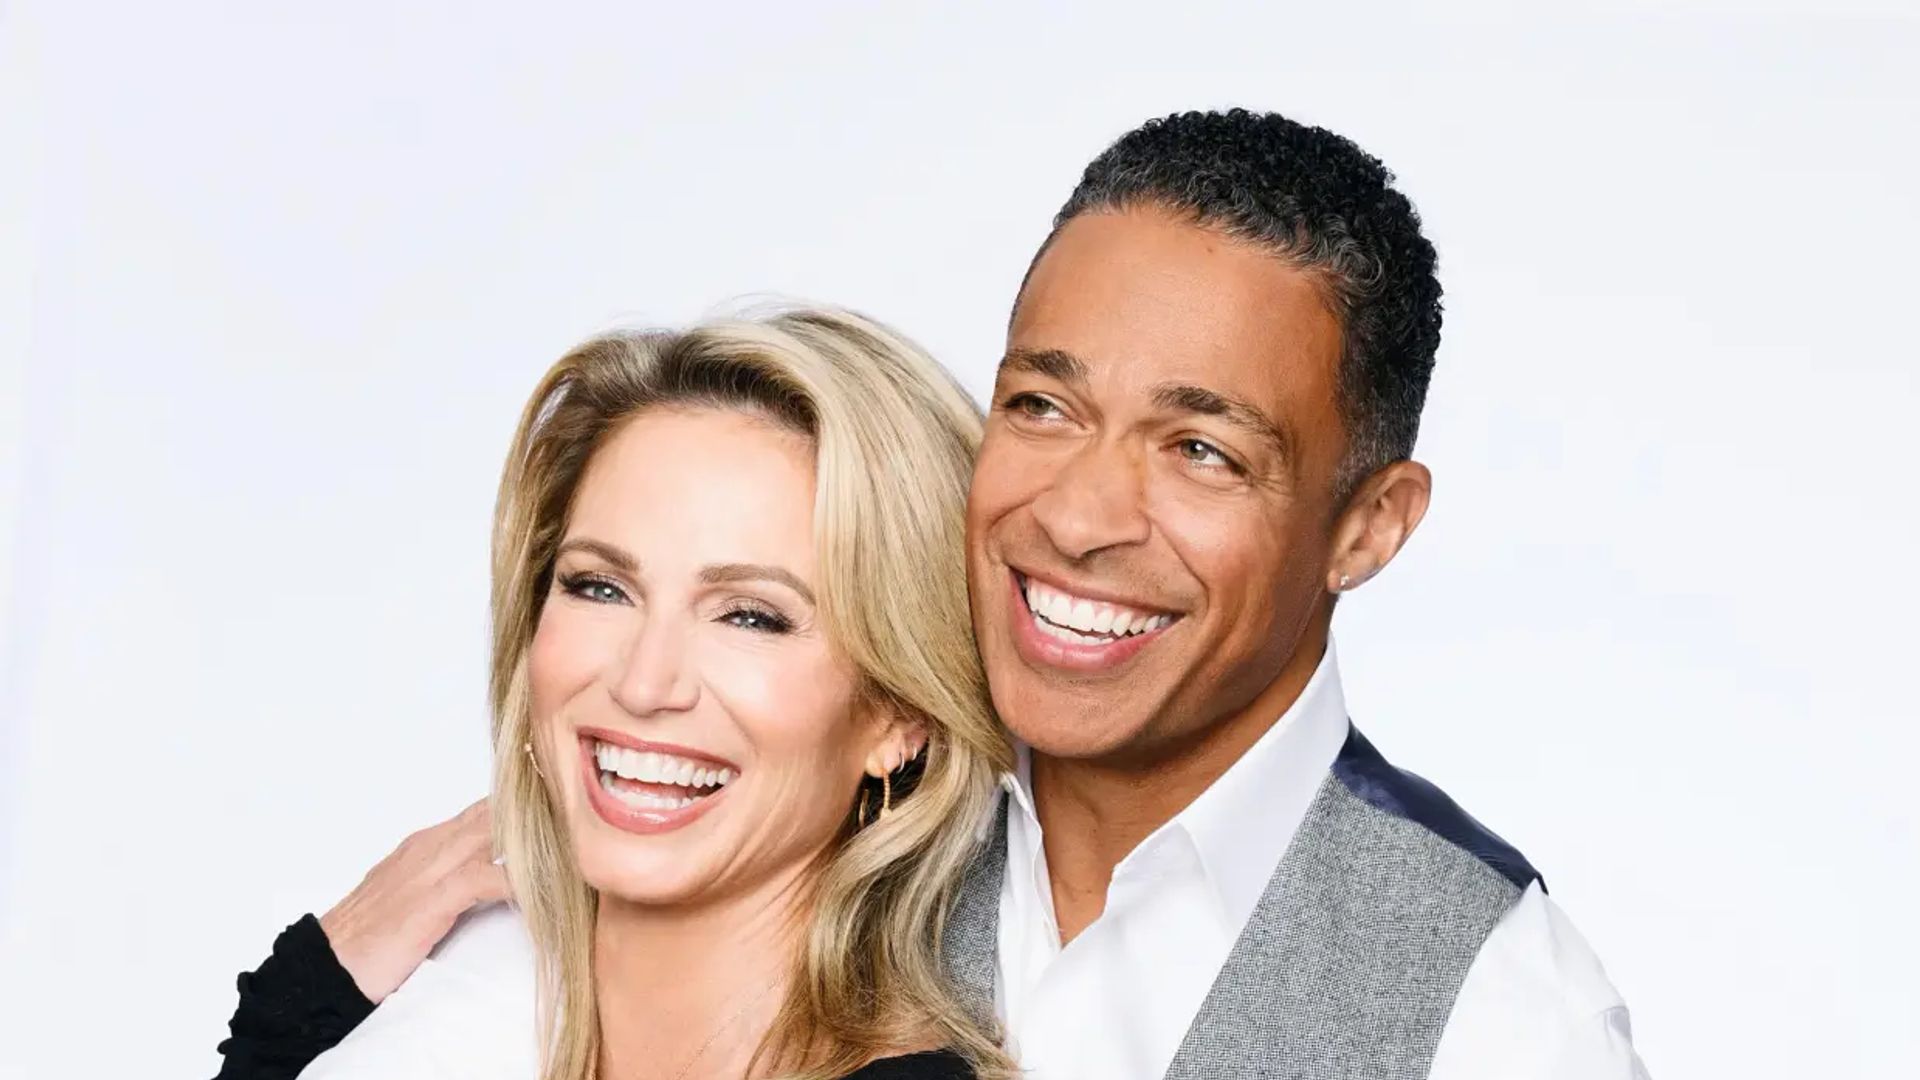 TJ Holmes and Amy Robach celebrate big news with mid-day champagne at romantic lunch